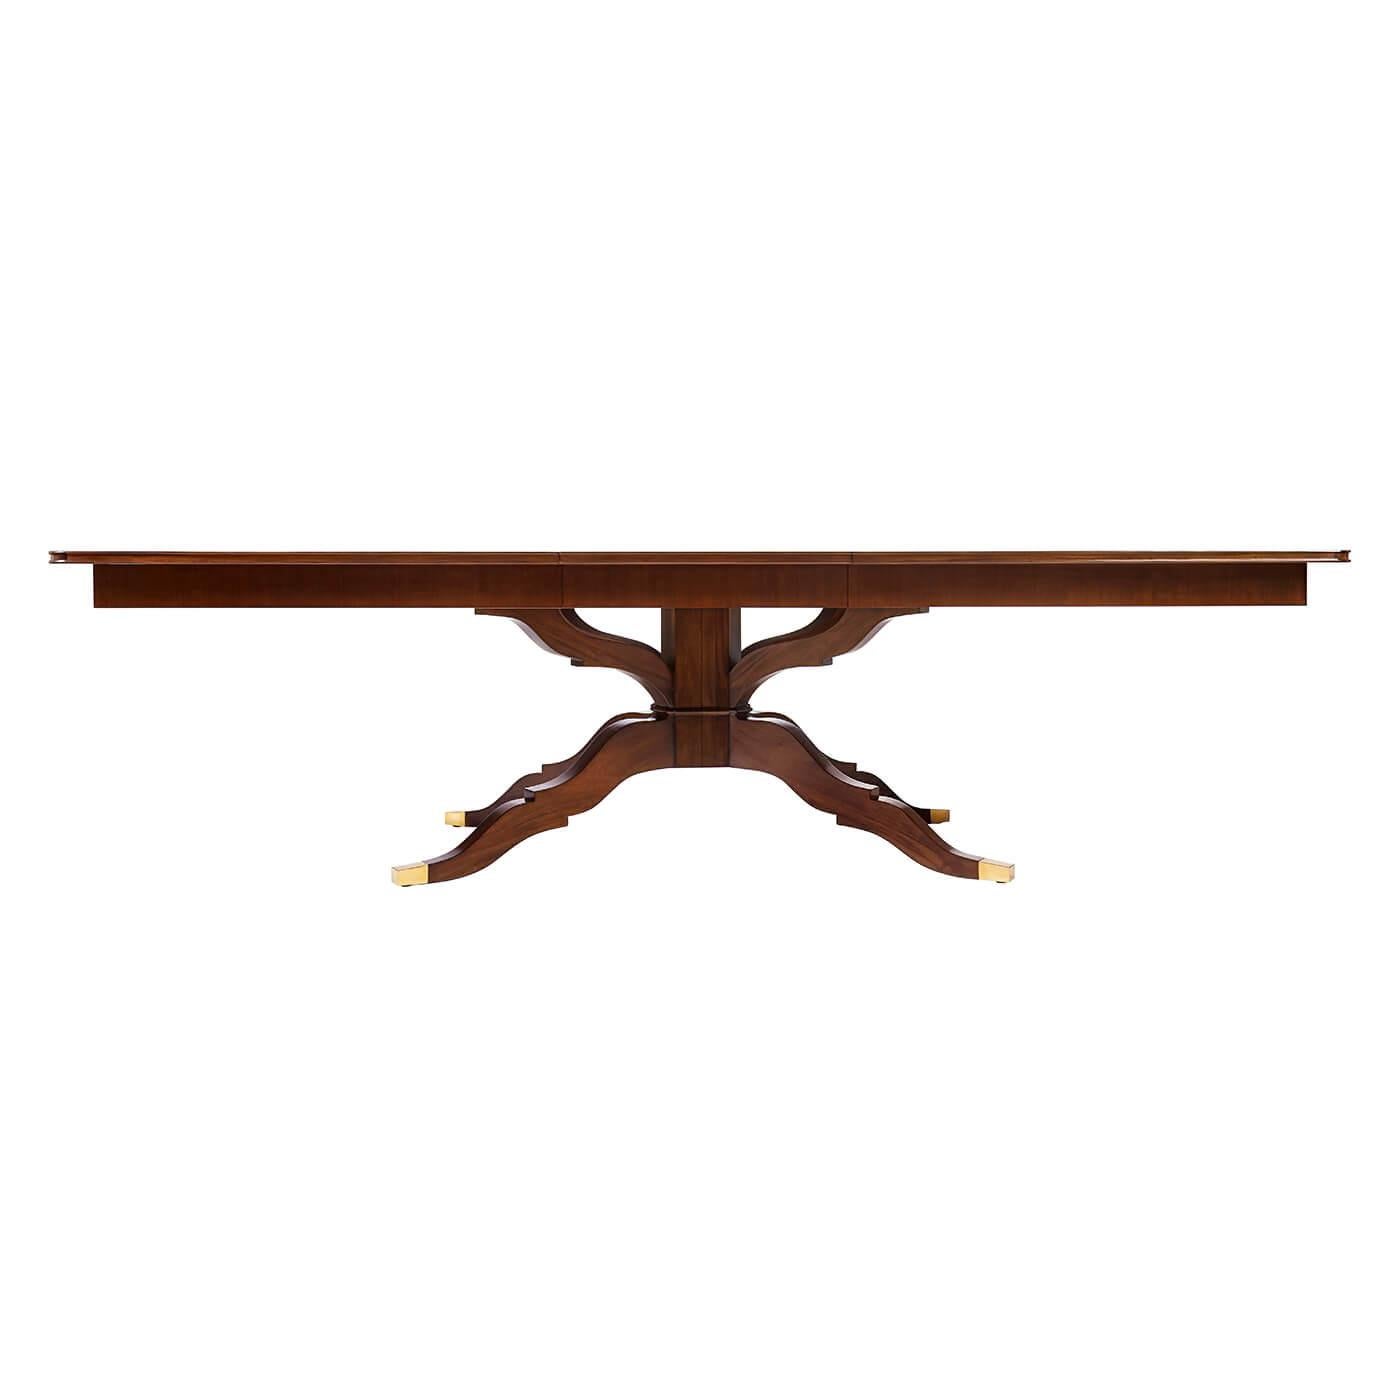 Vietnamese Midcentury Style Extension Dining Table